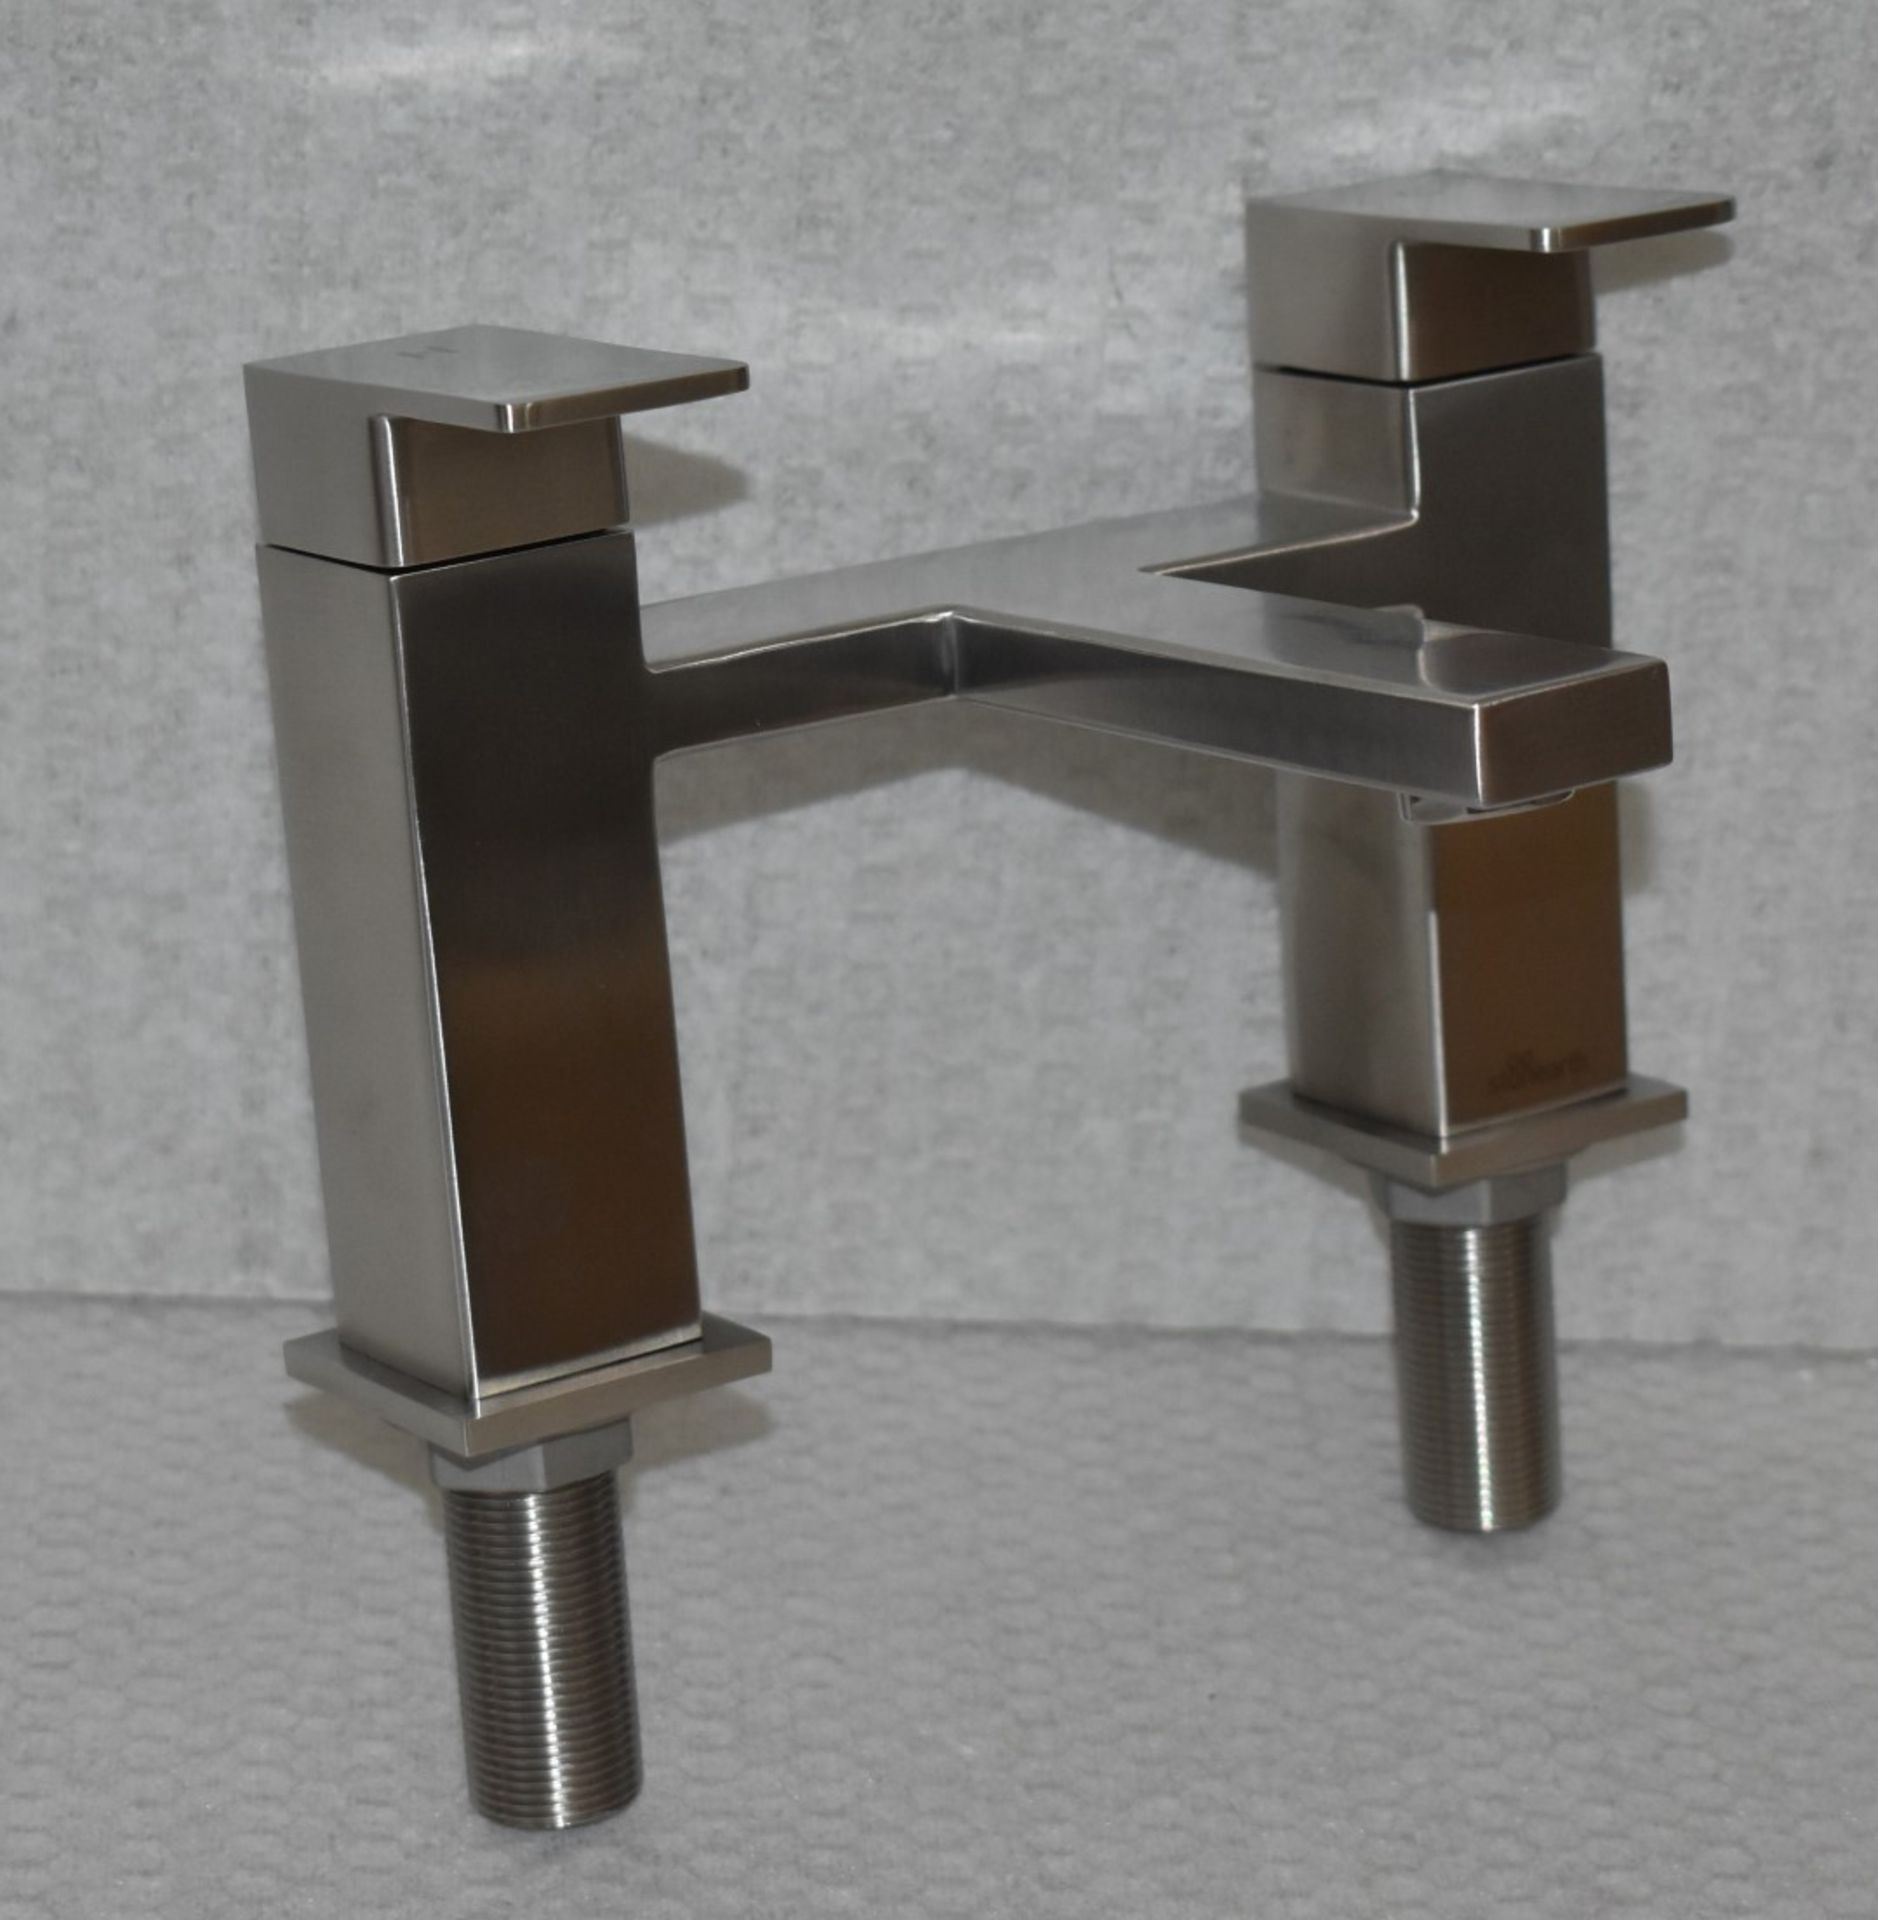 1 x Stonearth 'Metro' Stainless Steel Bath Filler Mixer Tap - Brand New & Boxed - RRP £340 - Ref: - Image 8 of 15